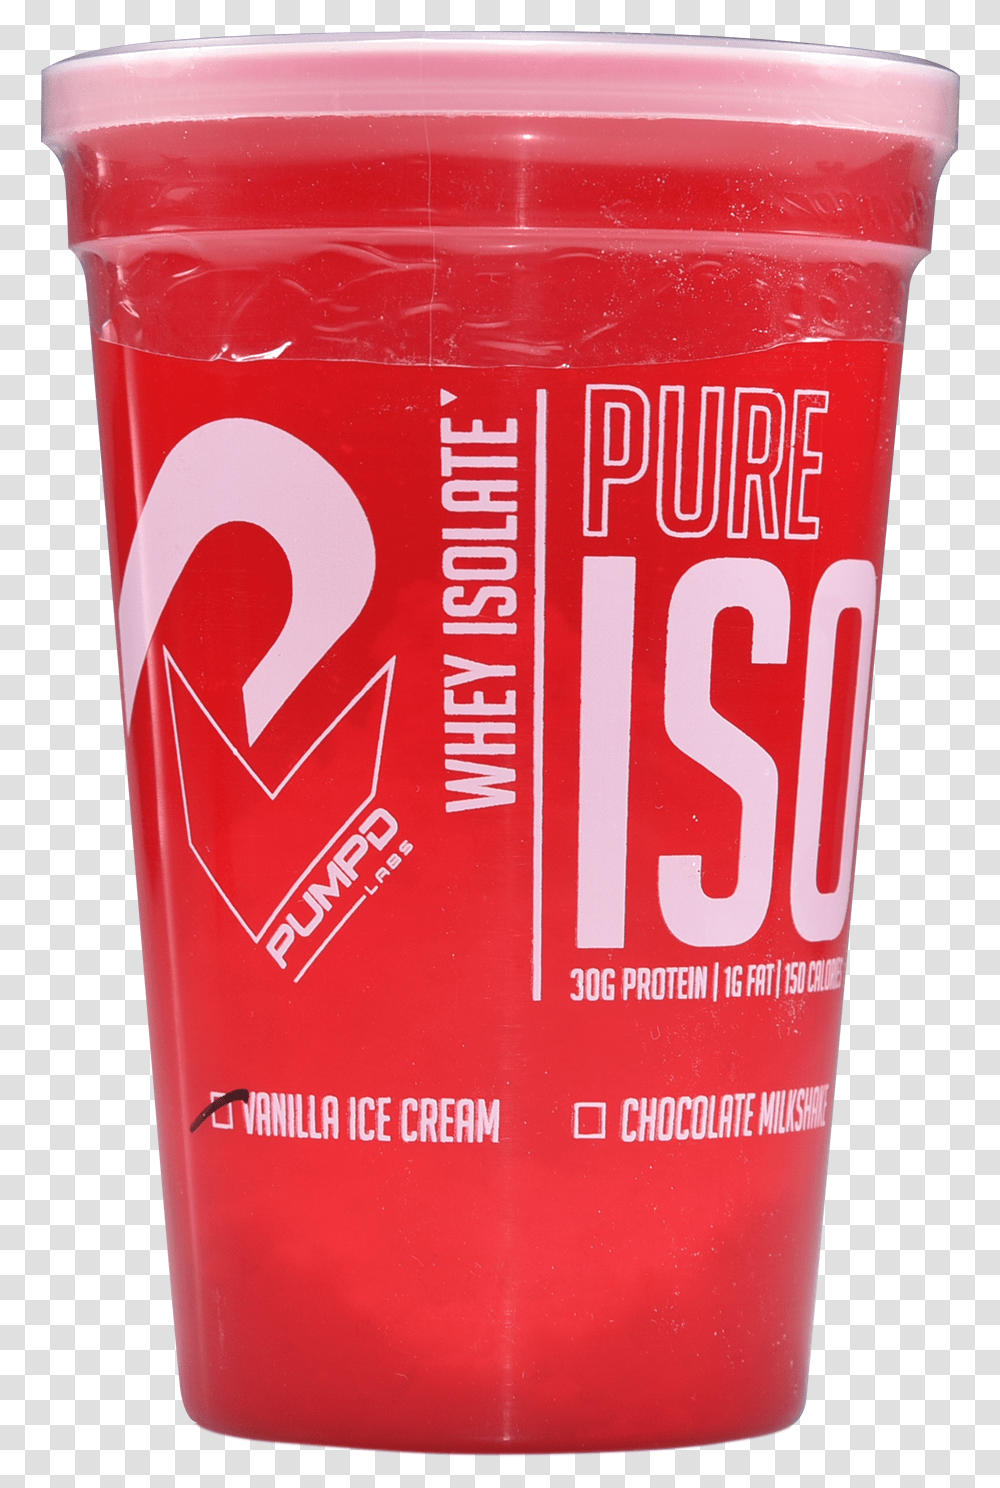 Pure Iso Sample 2 Cups For 5 Box, Bottle, Cosmetics, Ketchup, Food Transparent Png